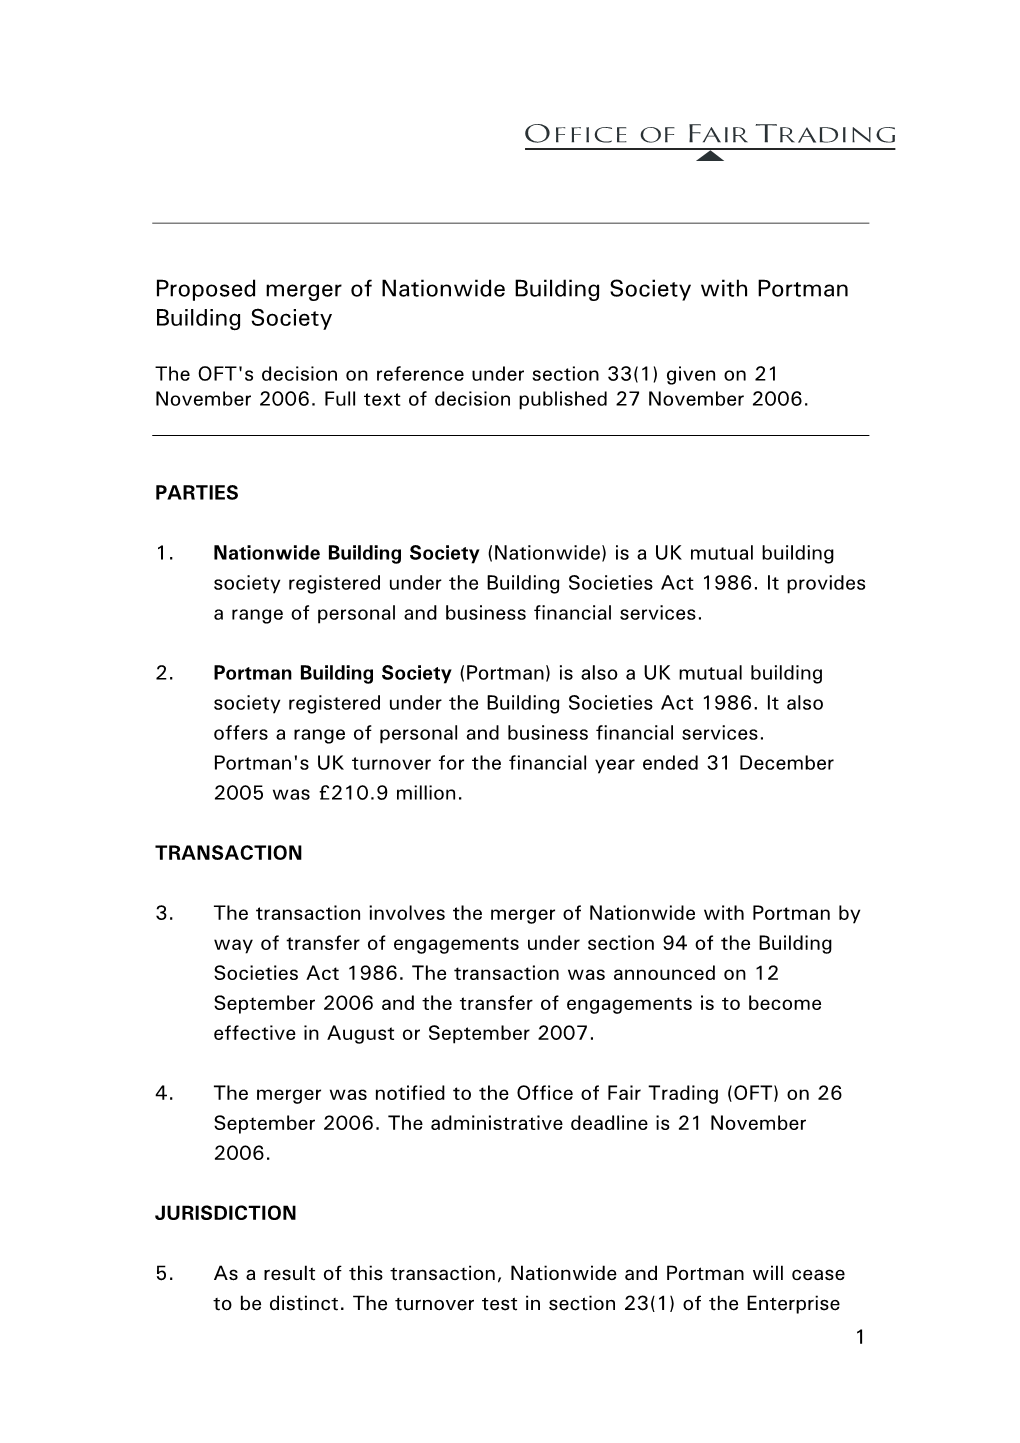 Proposed Merger of Nationwide Building Society with Portman Building Society